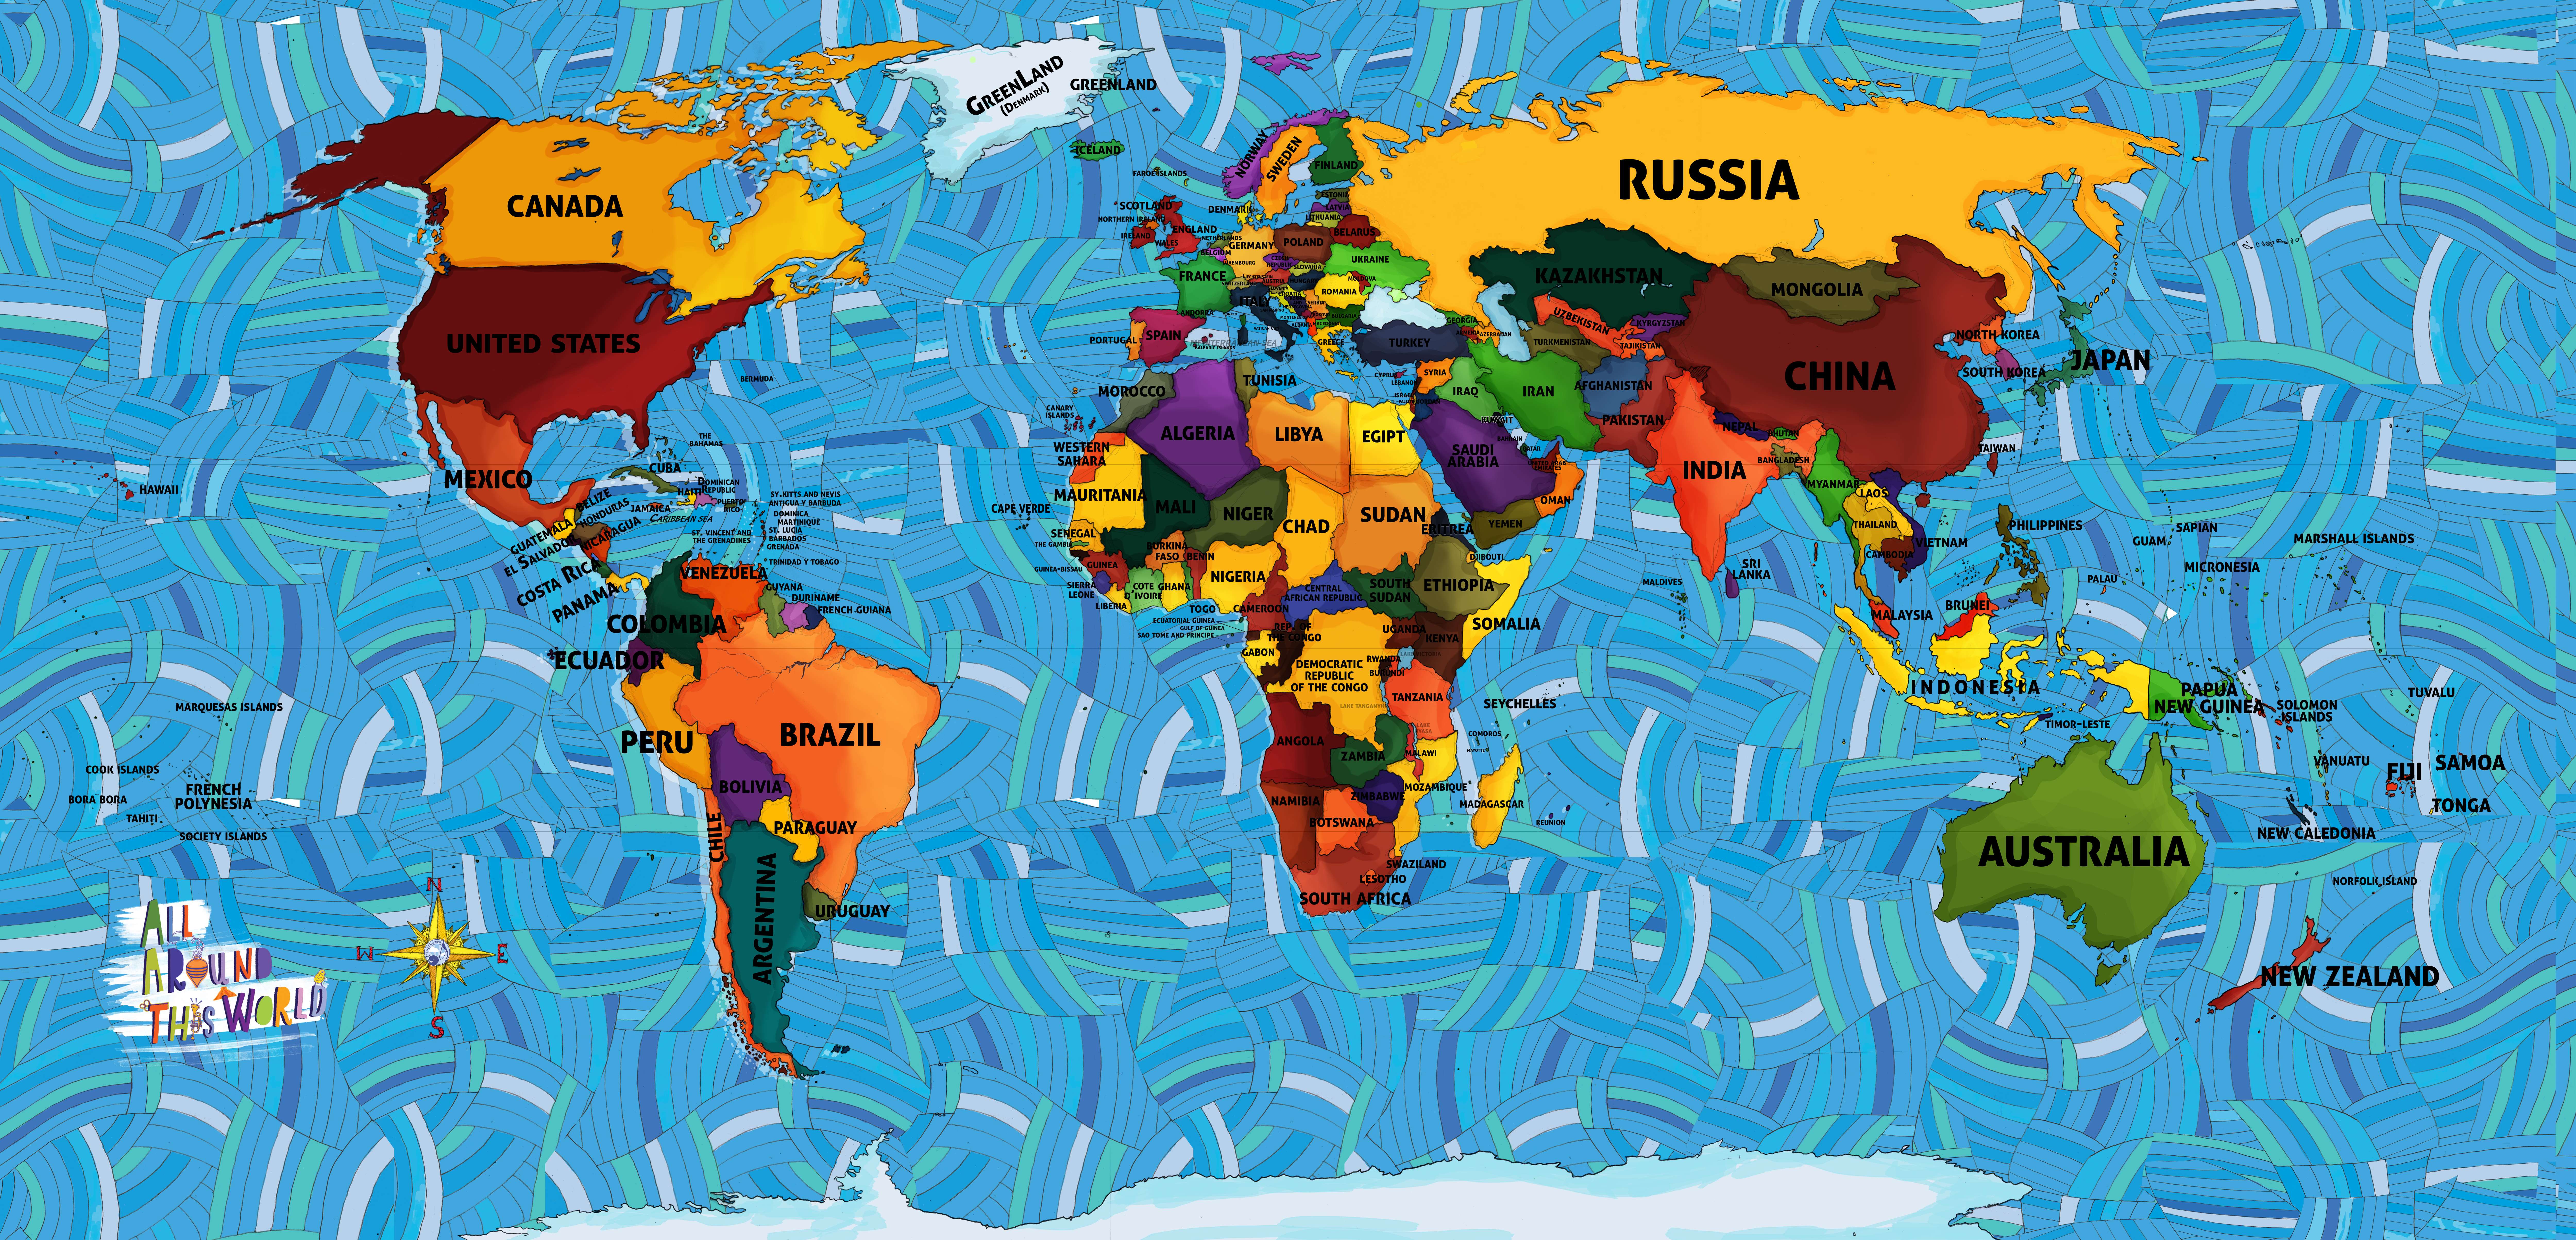 All Around This World global "Everywhere" map